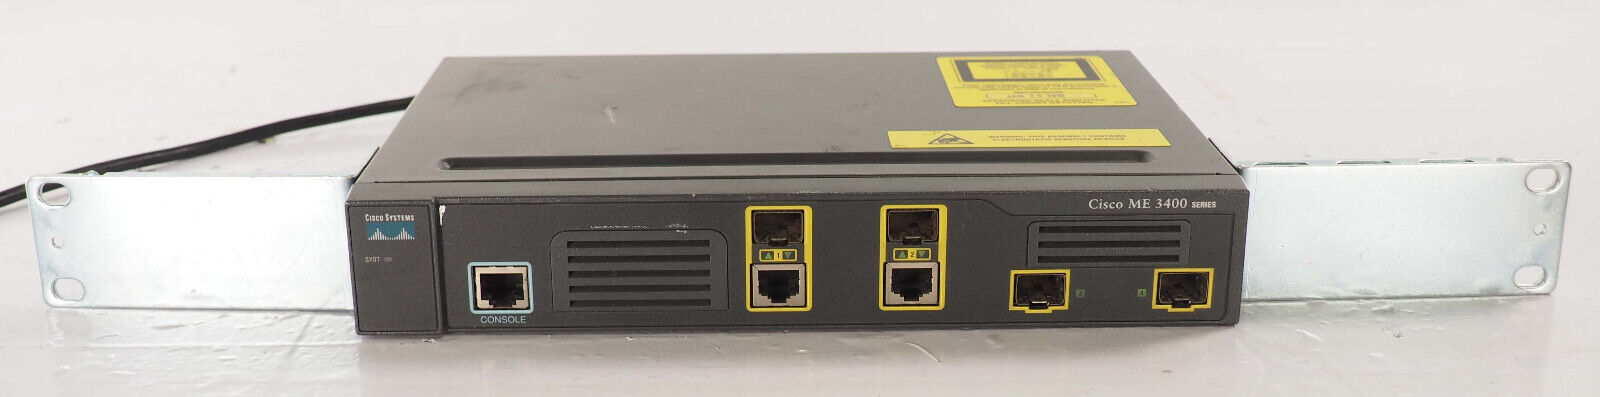 CISCO 3400 ME 3400G 2CS A Network Switch with Mounting Racks